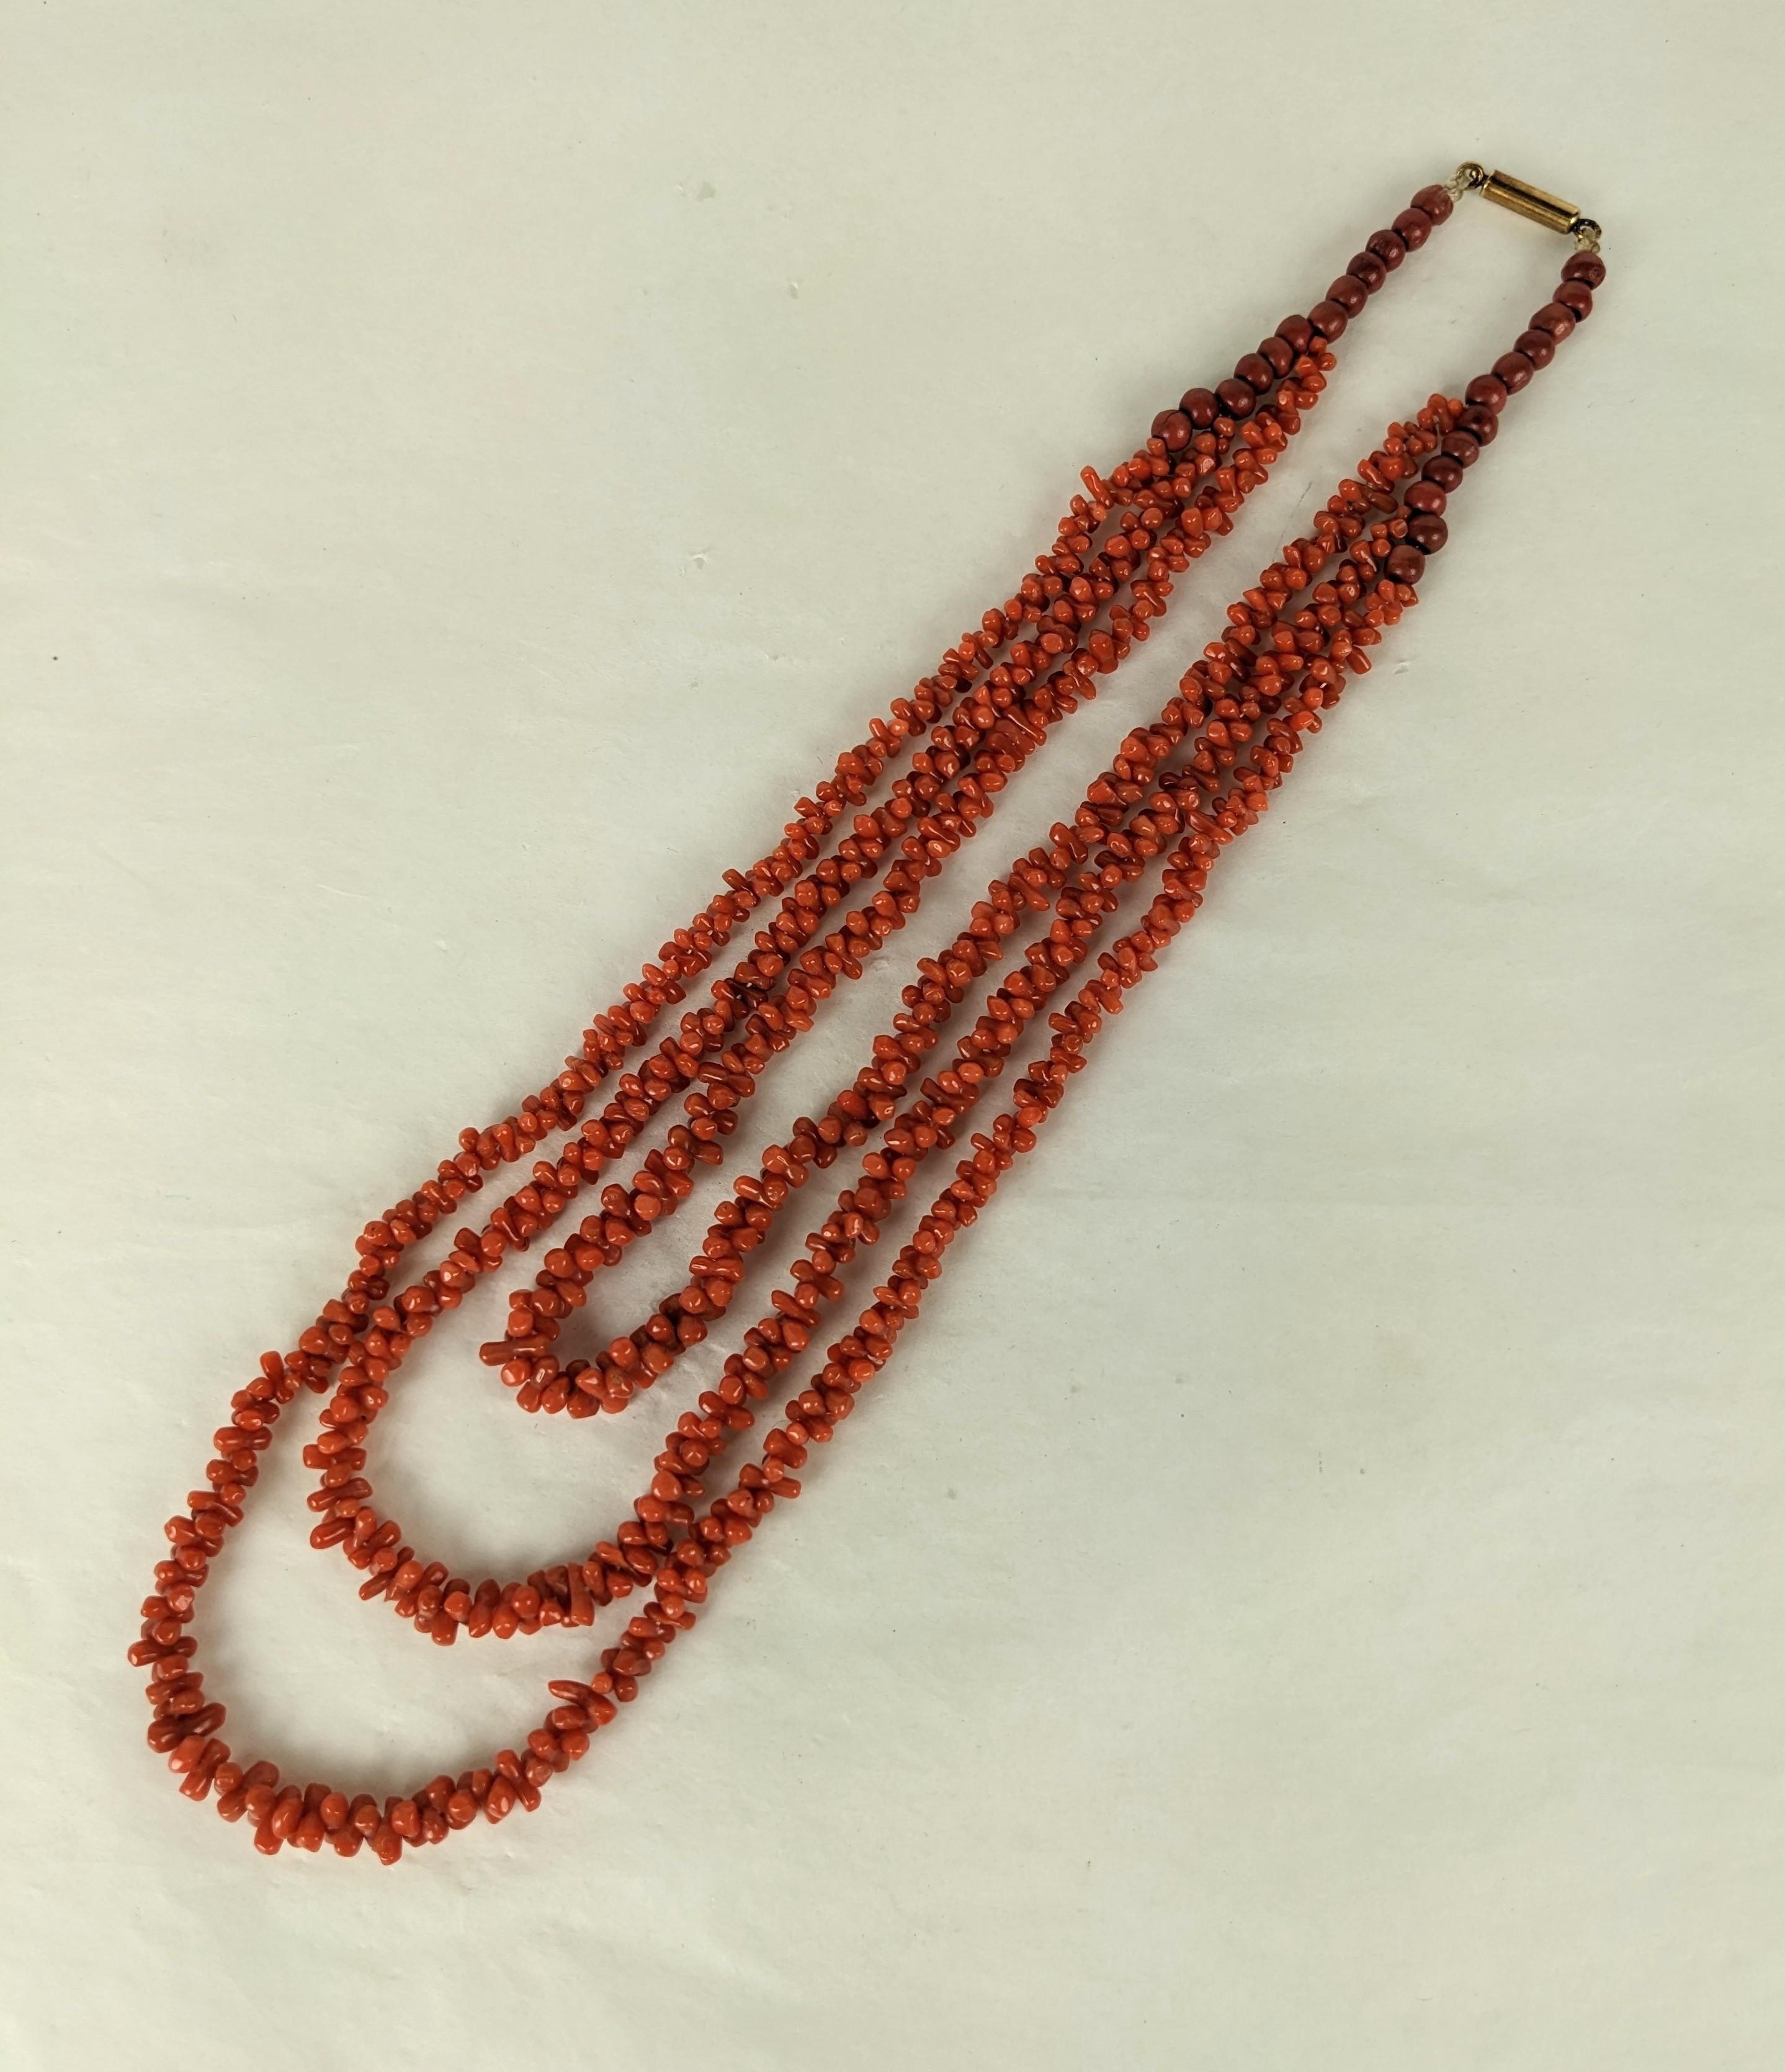 Victorian Coral 3 Strand Toggle Necklace from the late 19th Century. Composed of 3 strands of carved toggle beads which fall from larger coral resin beads at clasp which may have been added in the period to elongate the toggle beads. 1870's Italy.